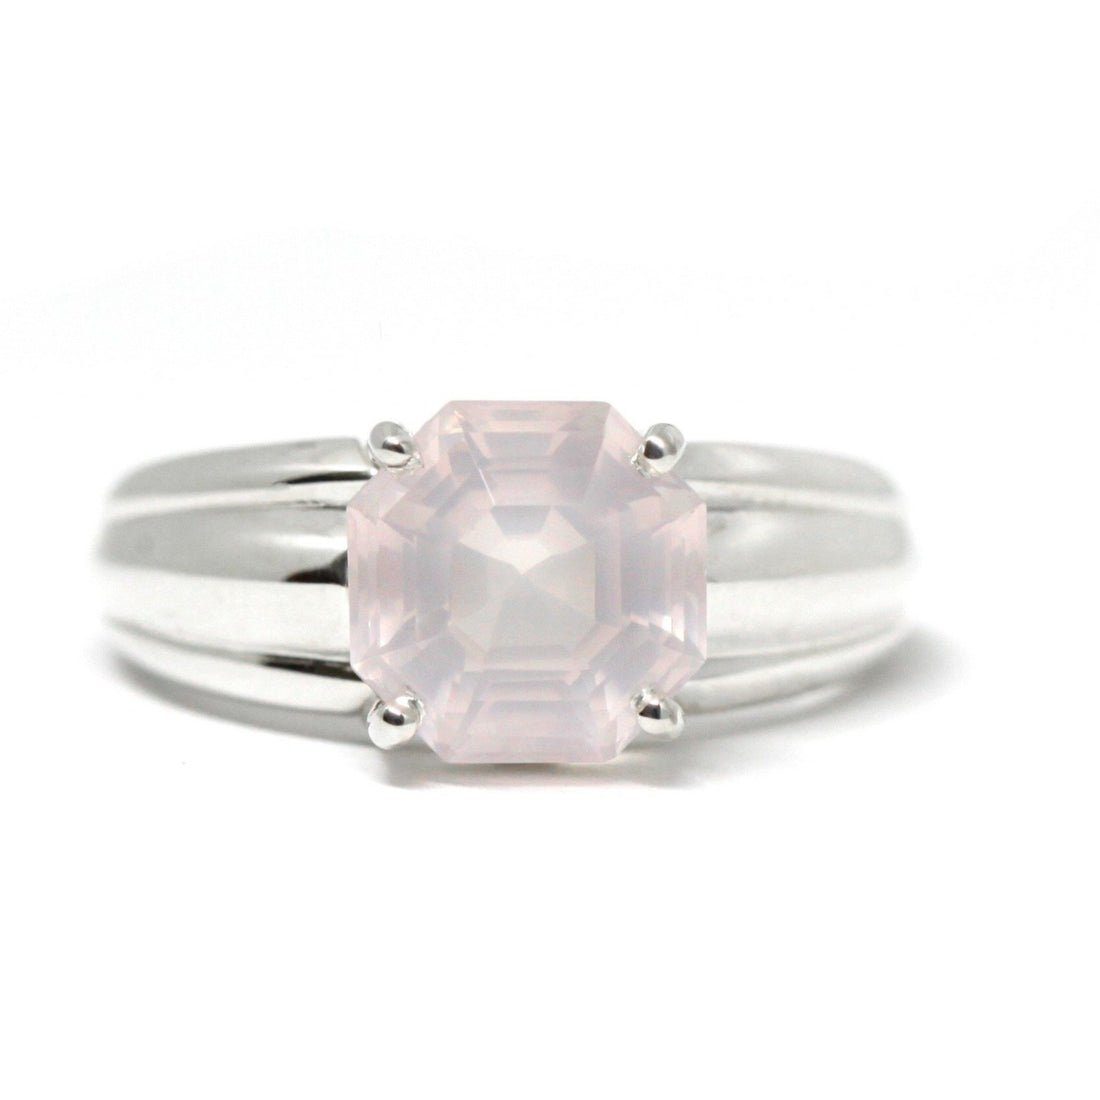 octogonal rose quartz bena jewelry fancy jewelry custom made ring montreal made in canada fine jewelry designer little italy jeweler edgy color gemstone jewls custom made in montreal handmade in Canada